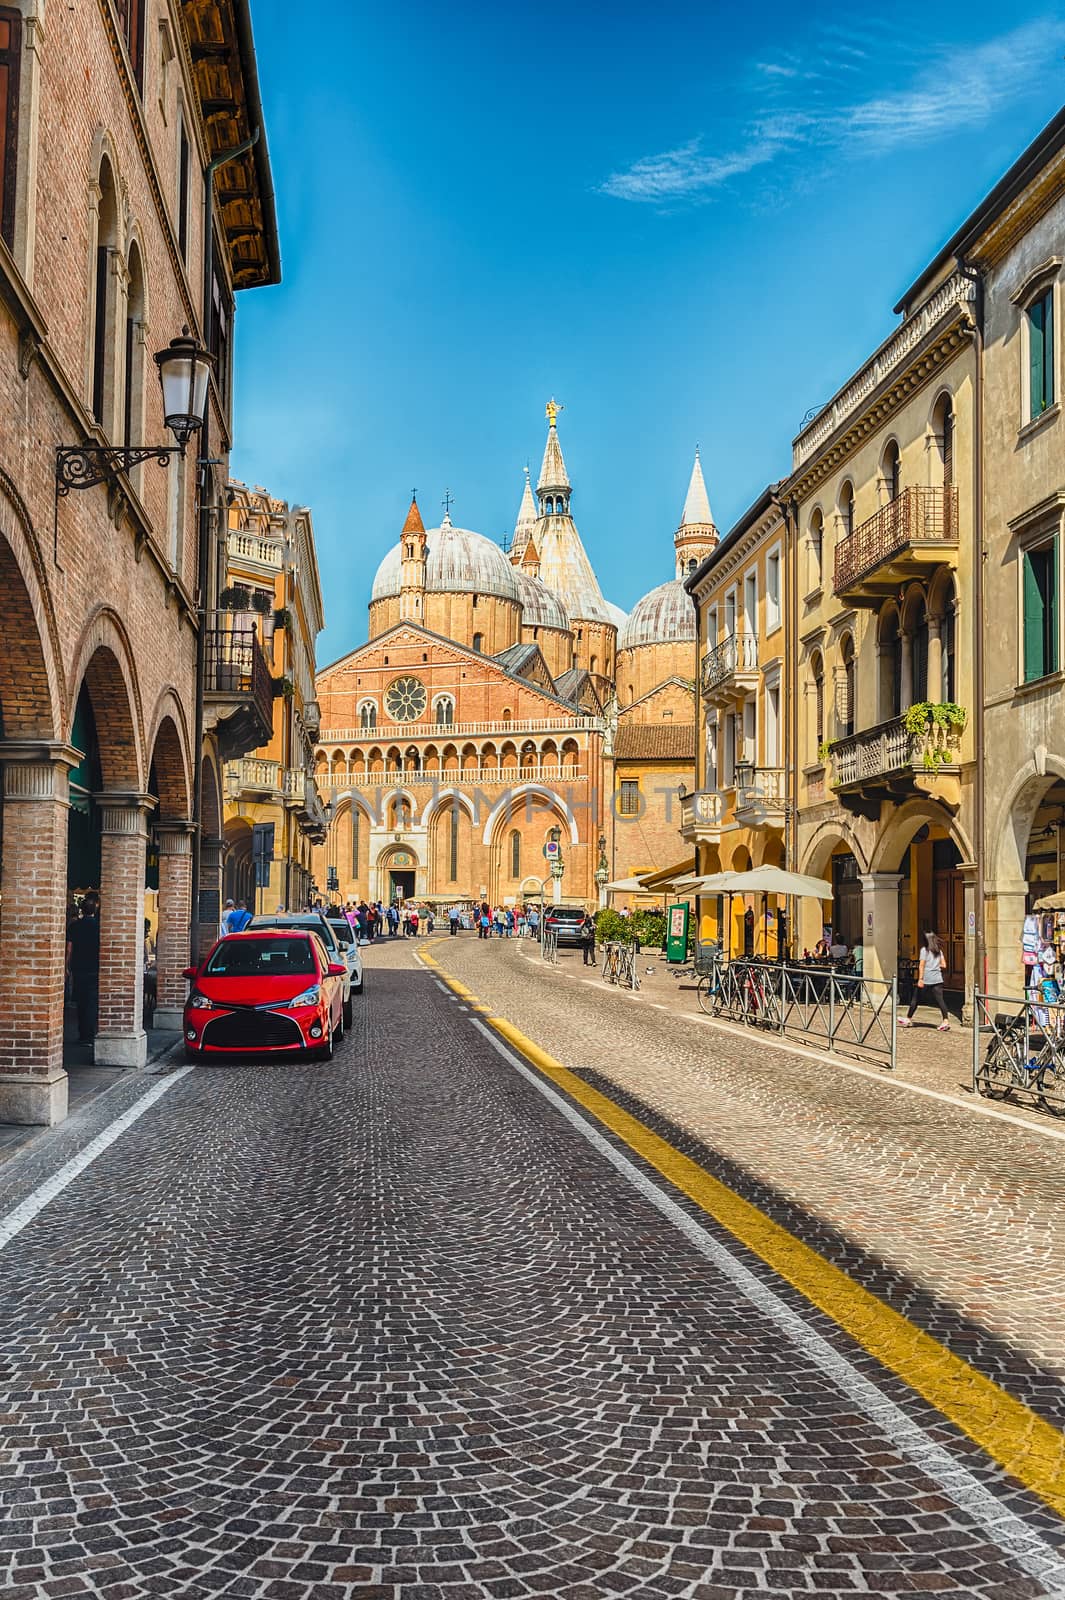 Facade of the Basilica of Saint Anthony, iconic landmark and sightseeing in Padua, Italy